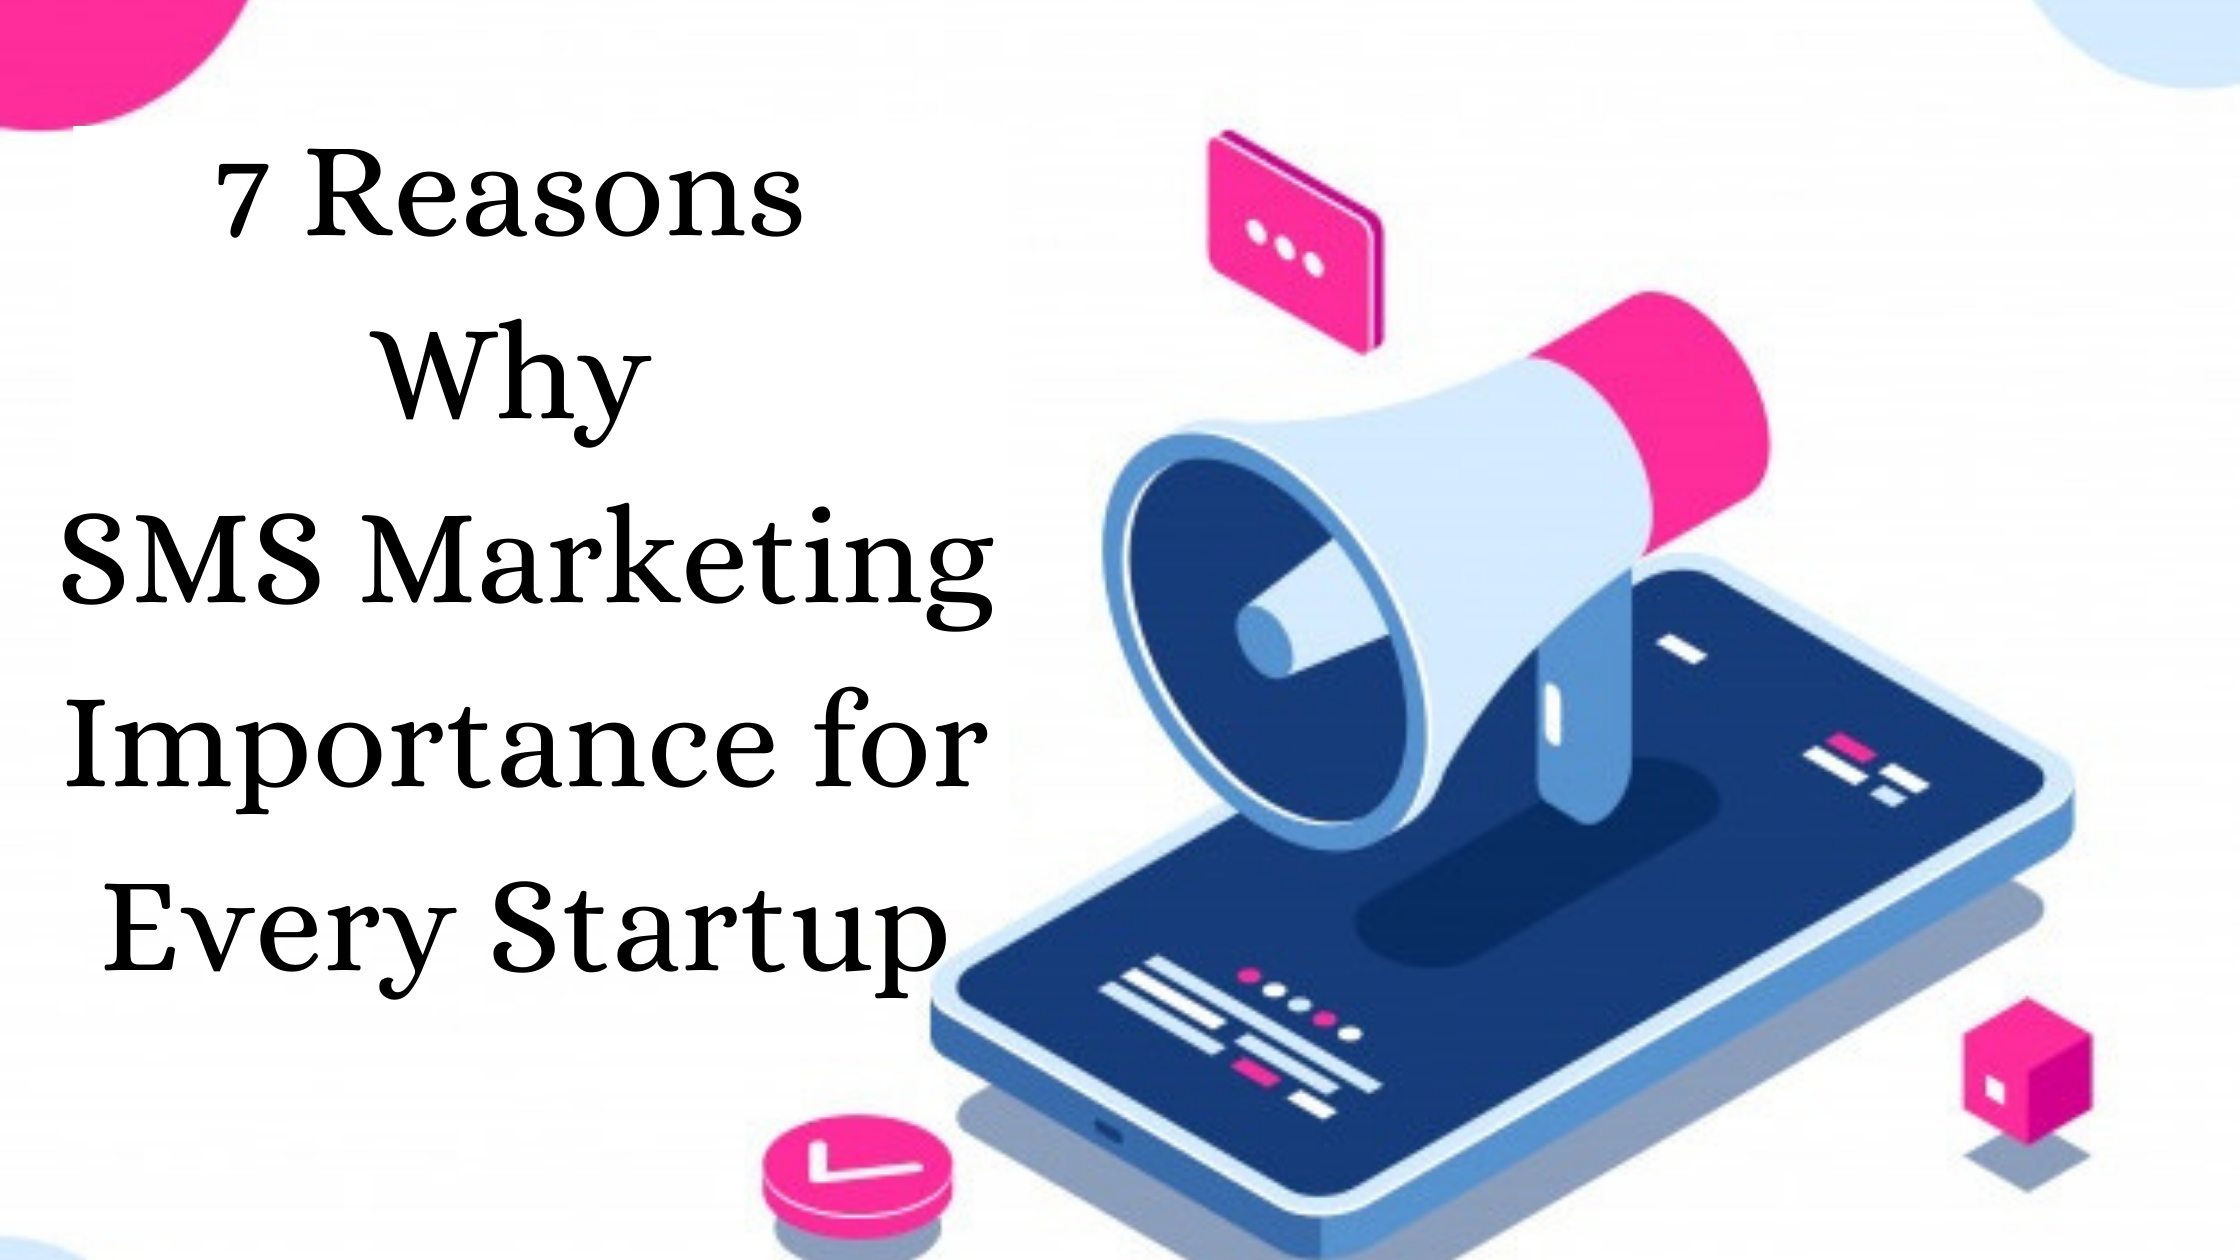 7 Reasons Why SMS Marketing Importance for Every Startup